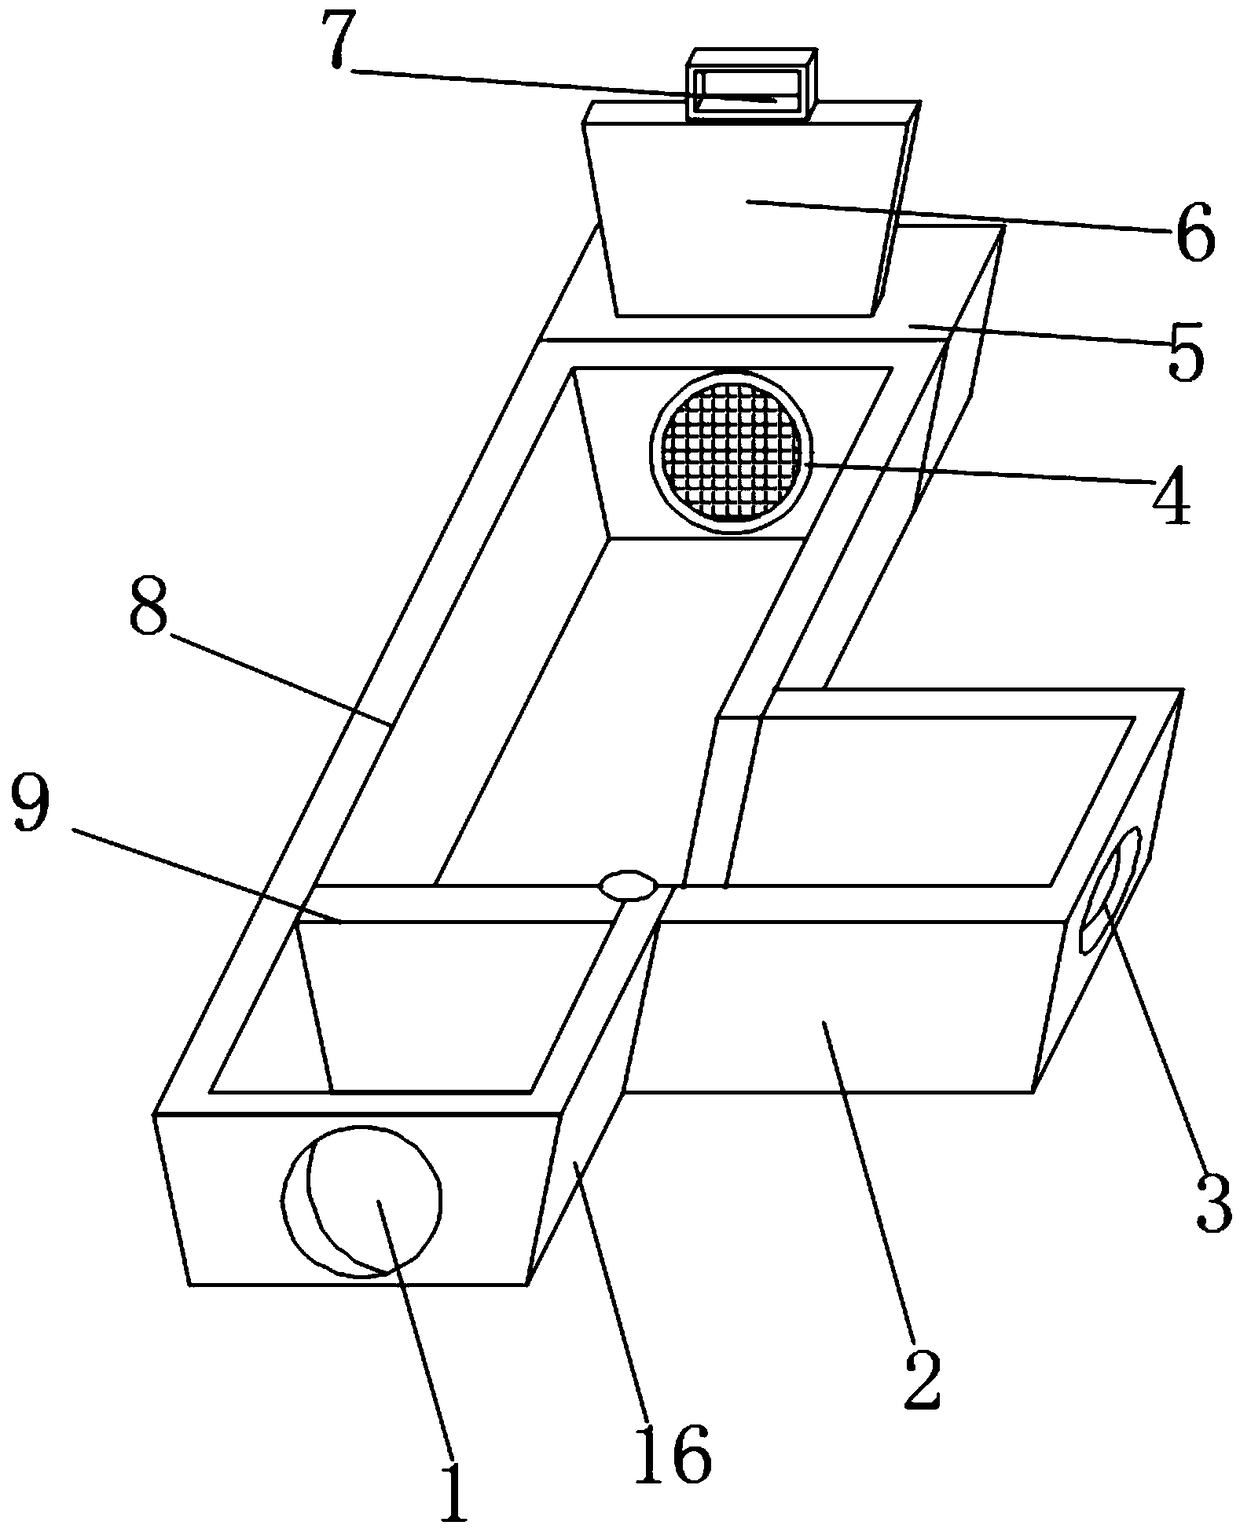 Drainage device for hydraulic engineering